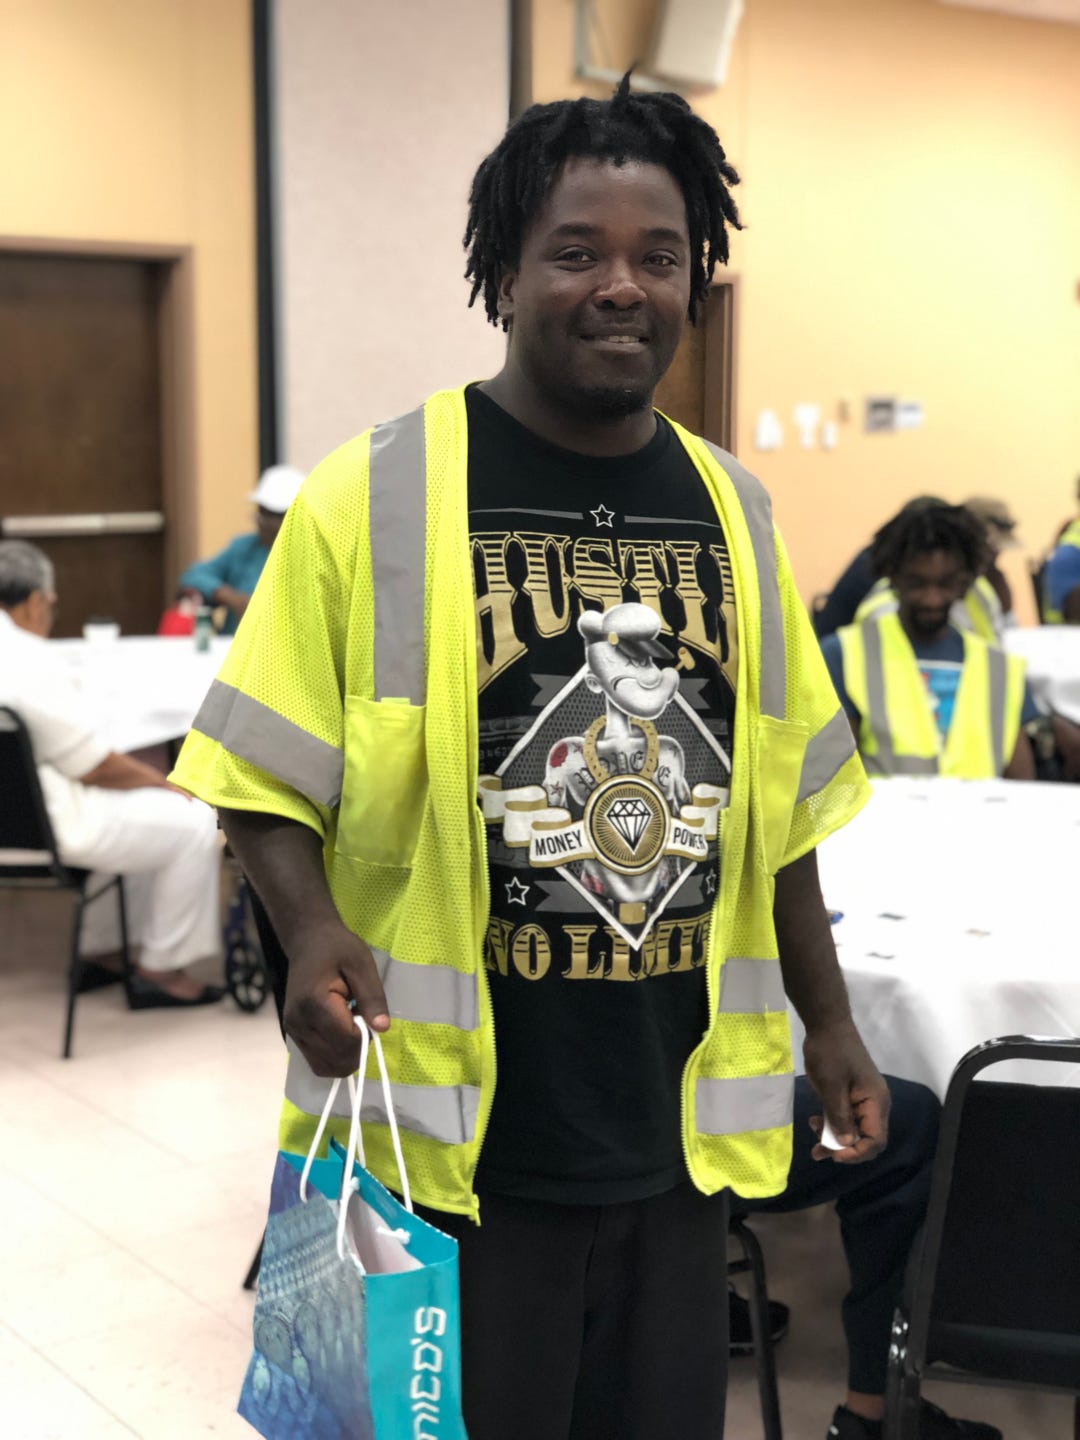 Monroe Sanitation Workers were awarded door prizes provided by local businesses at an event sponsored by the Samoan Civic & Social Club and Allen Green Williamson LLP for Waste and Recycling Workers Week.